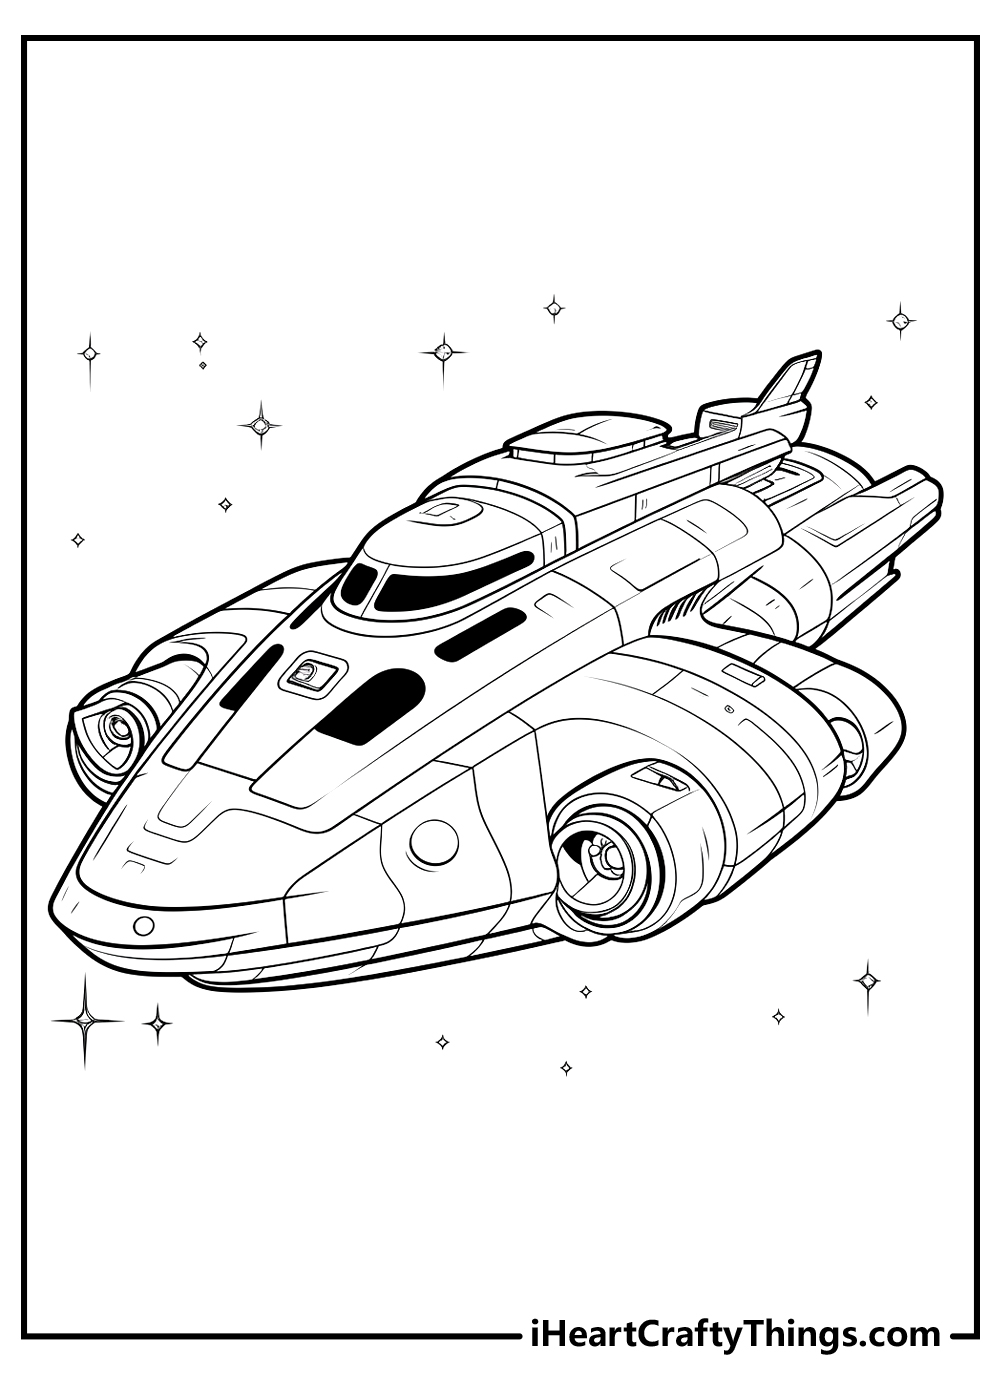 spaceship coloring pages for adults